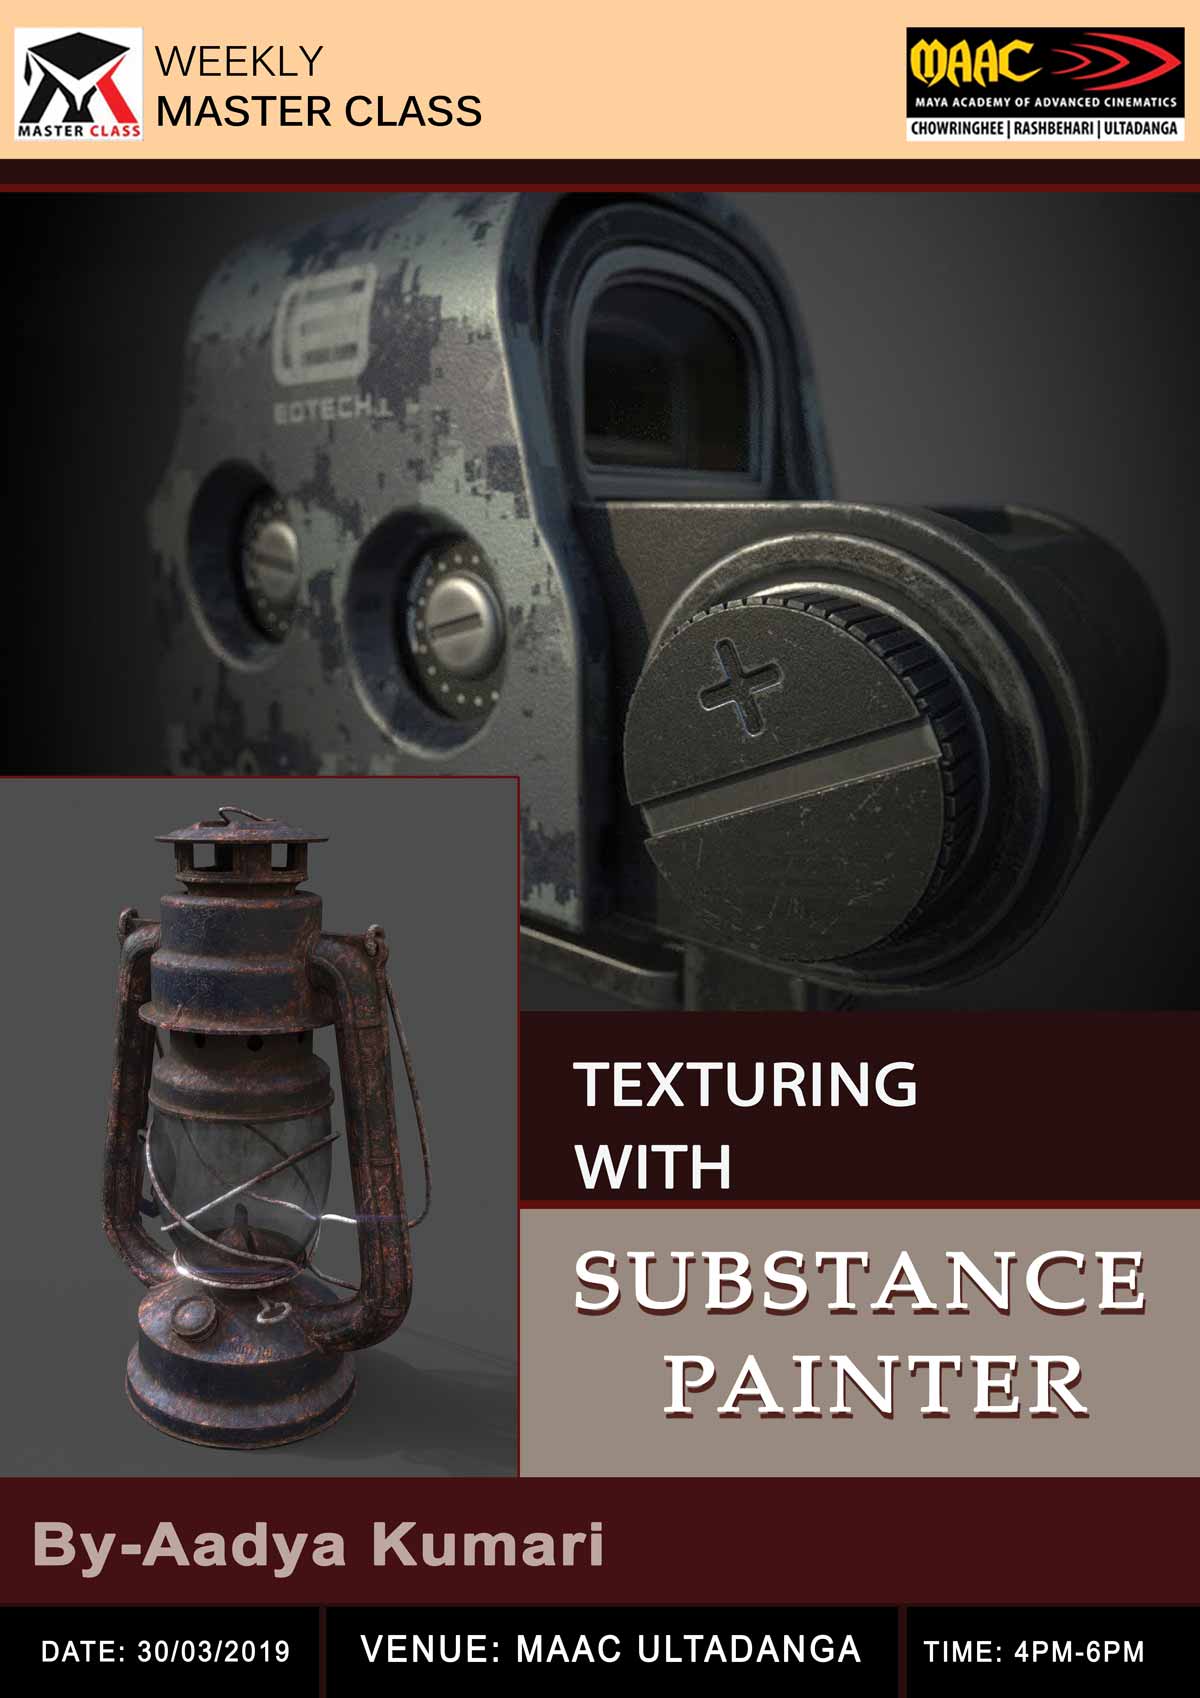 Weekly Master Class on Texturing with Substance Painter